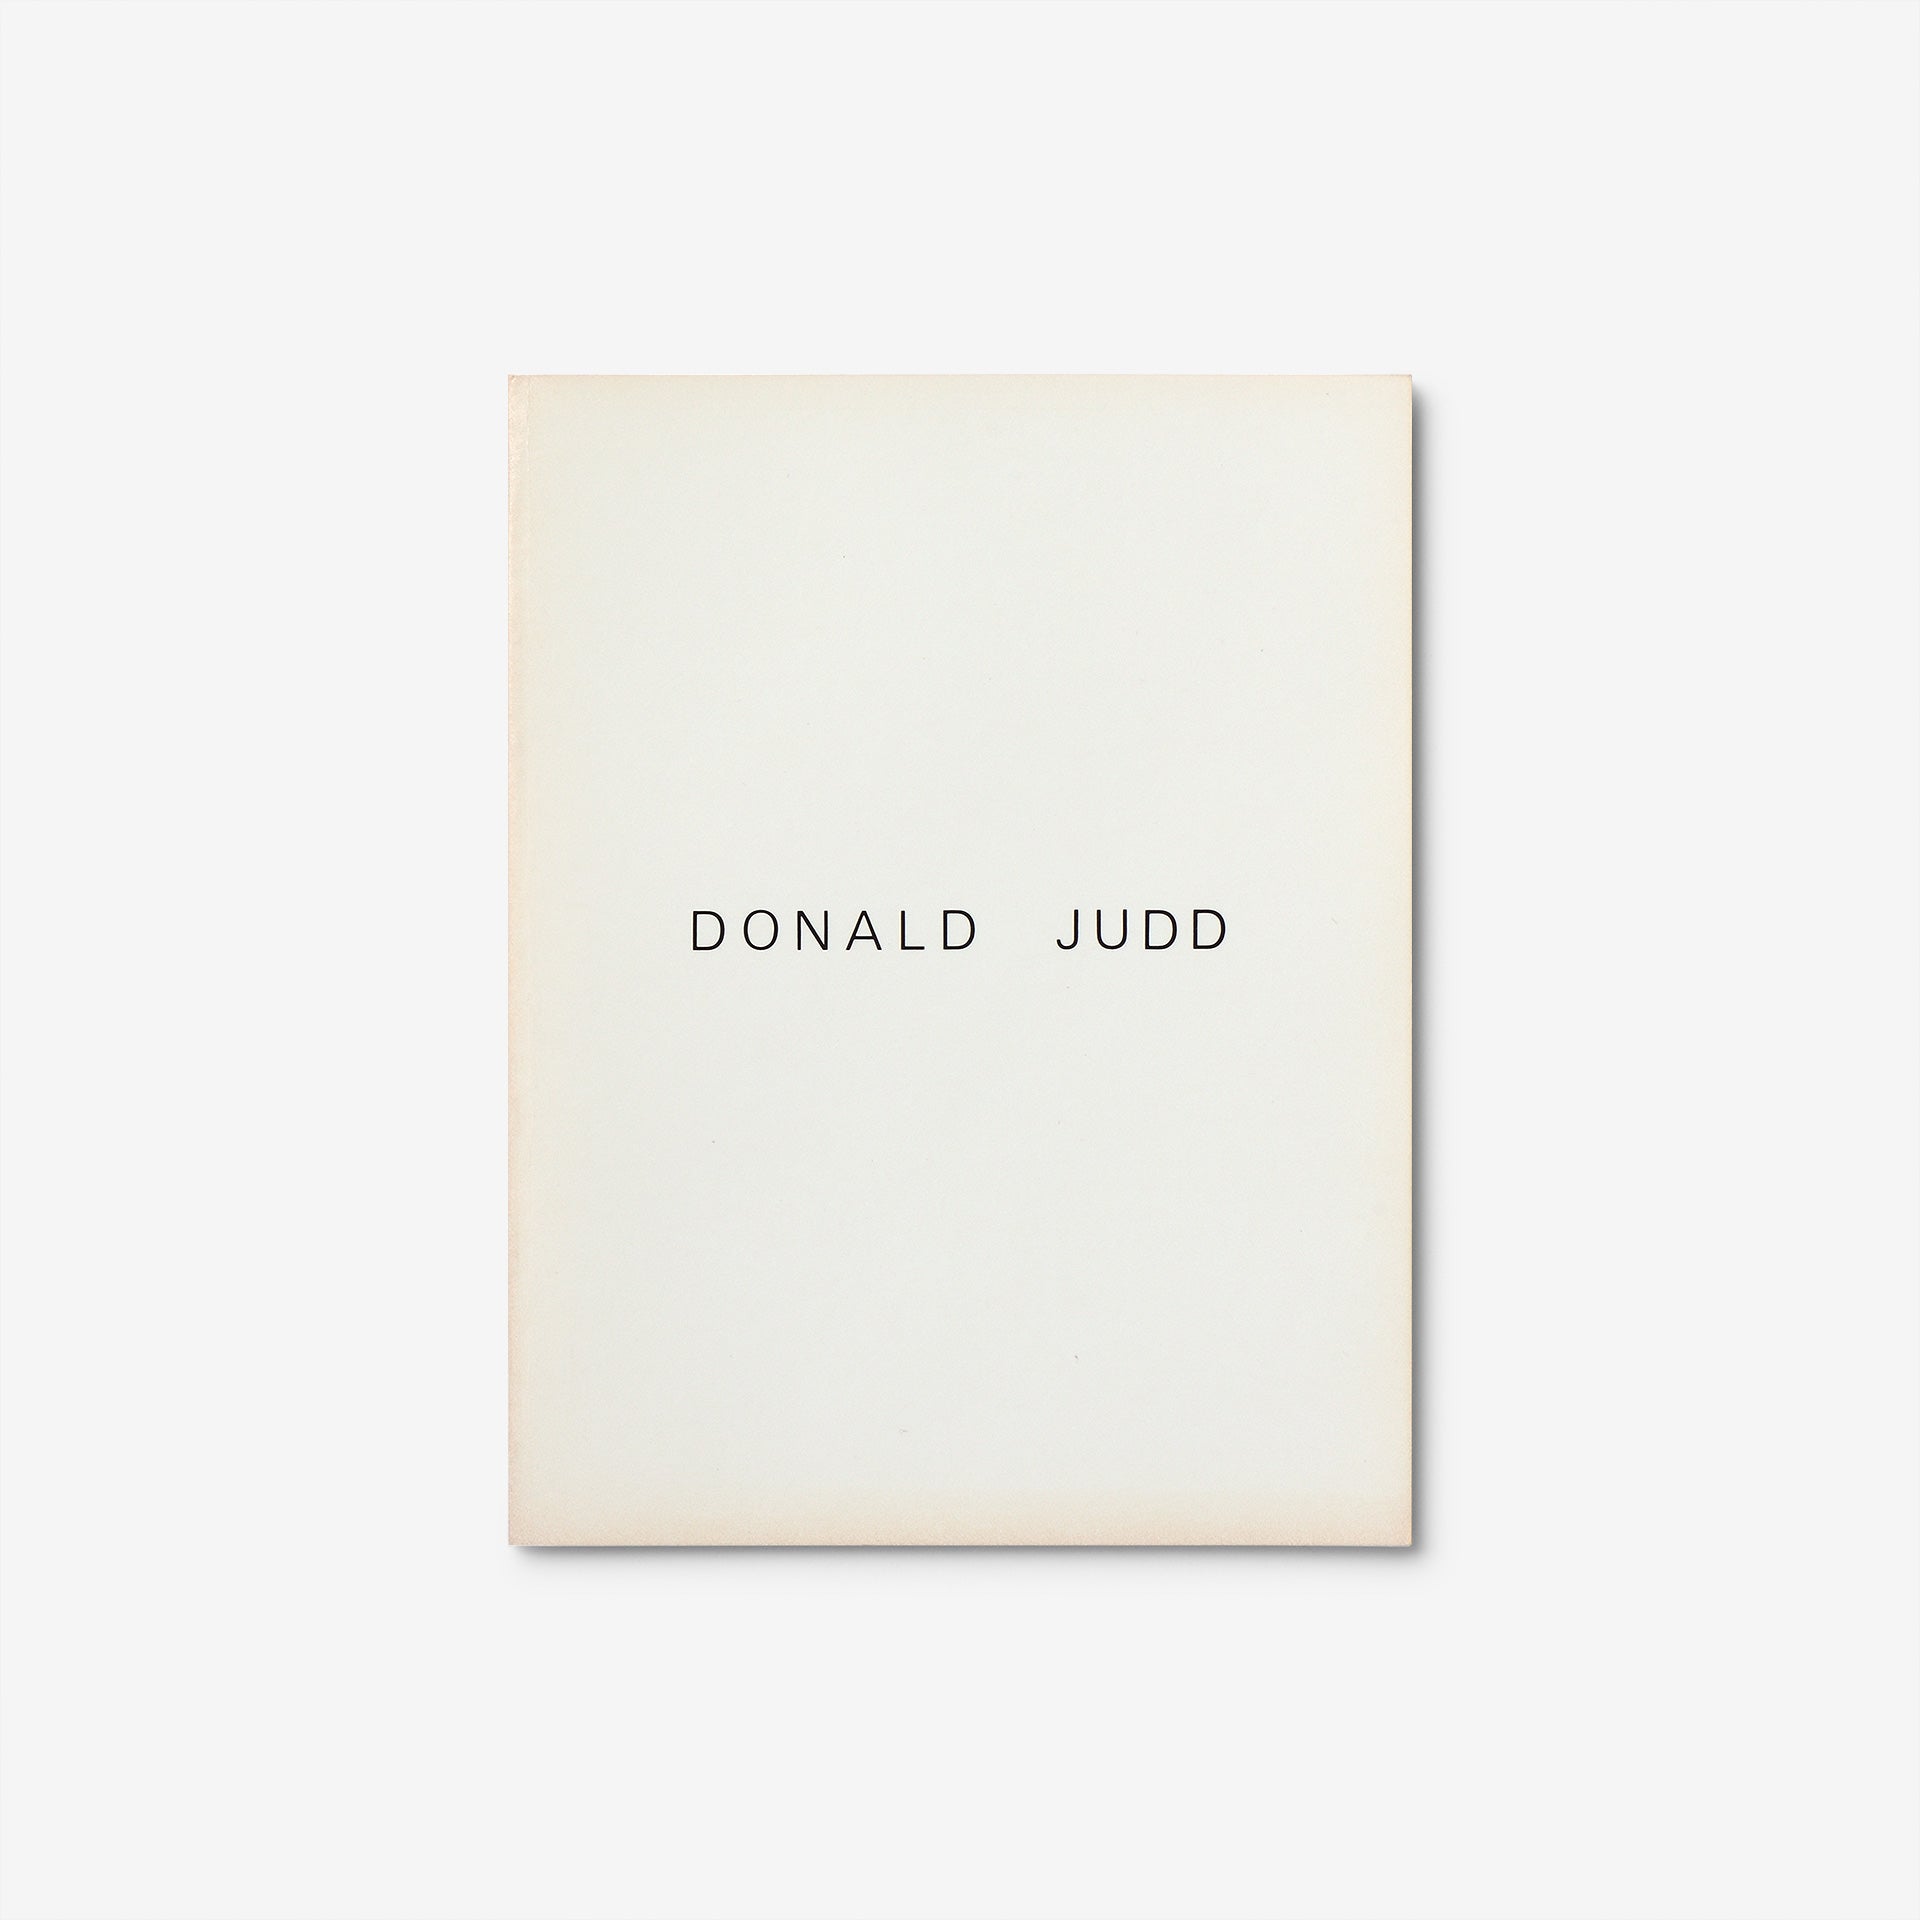 Donald Judd: 15 Works | North East